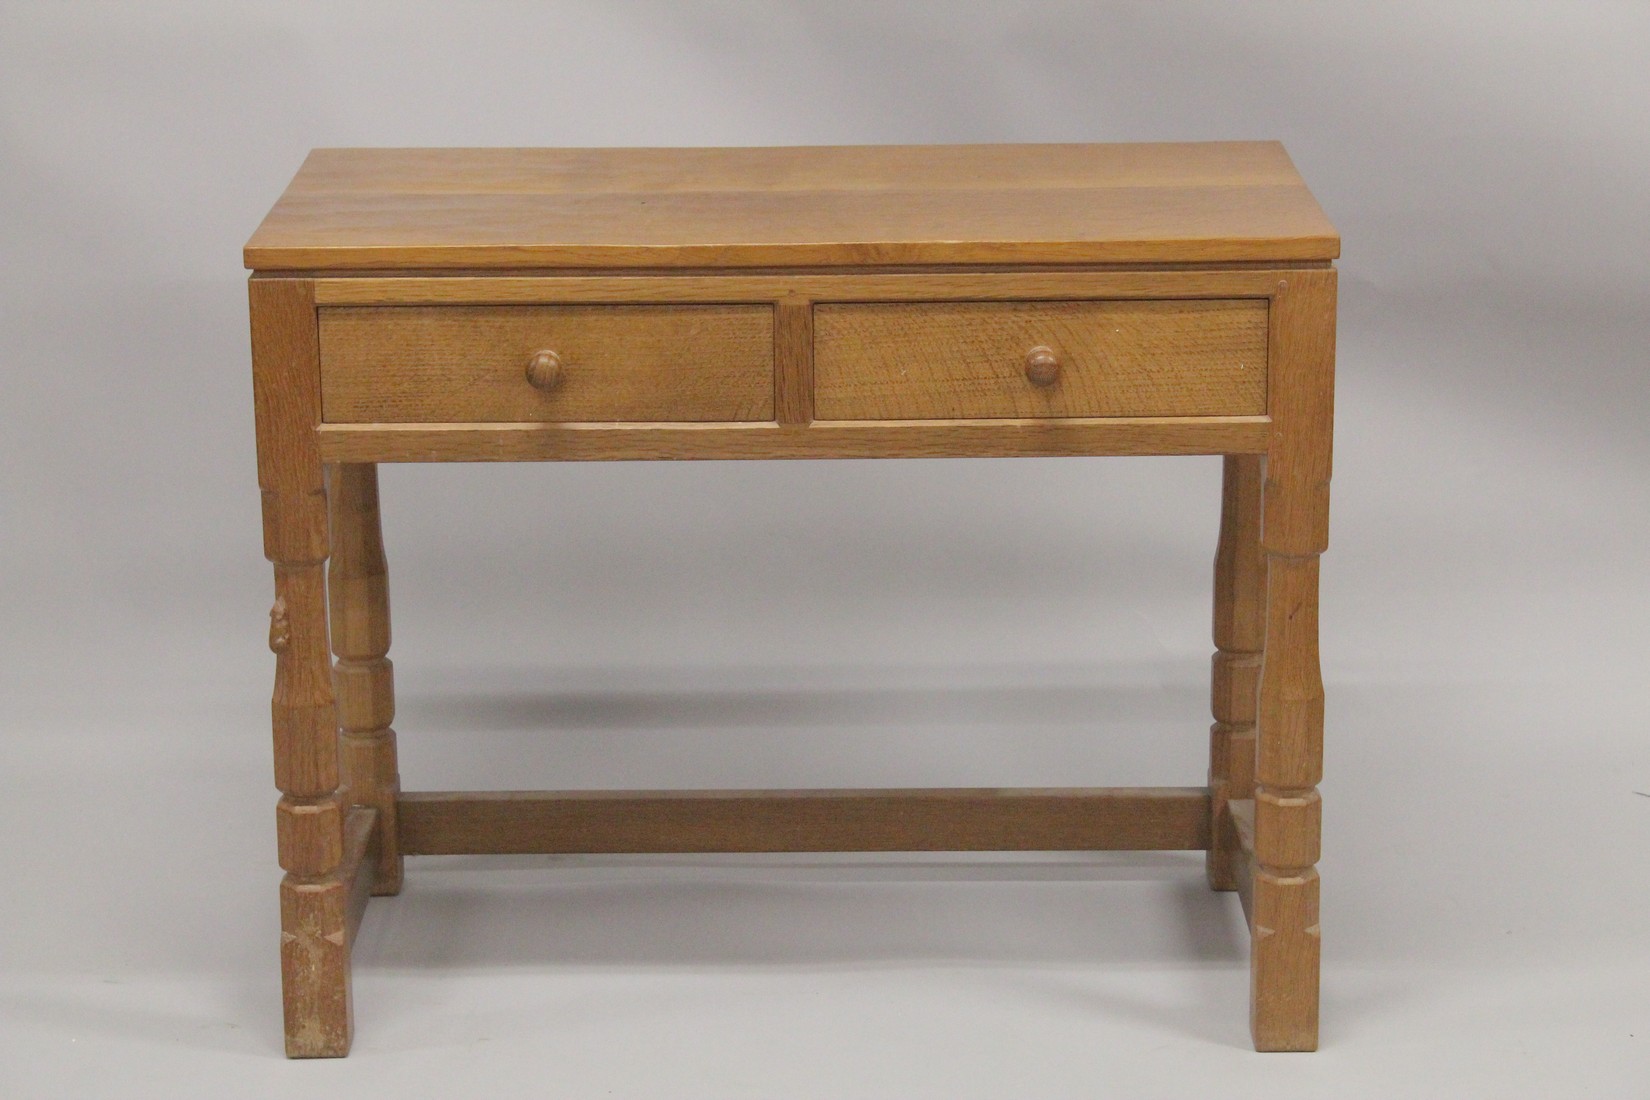 ROBERT "MOUSEMAN" THOMPSON. AN OAK SIDE TABLE with an adzed rectangular top, two frieze drawers with